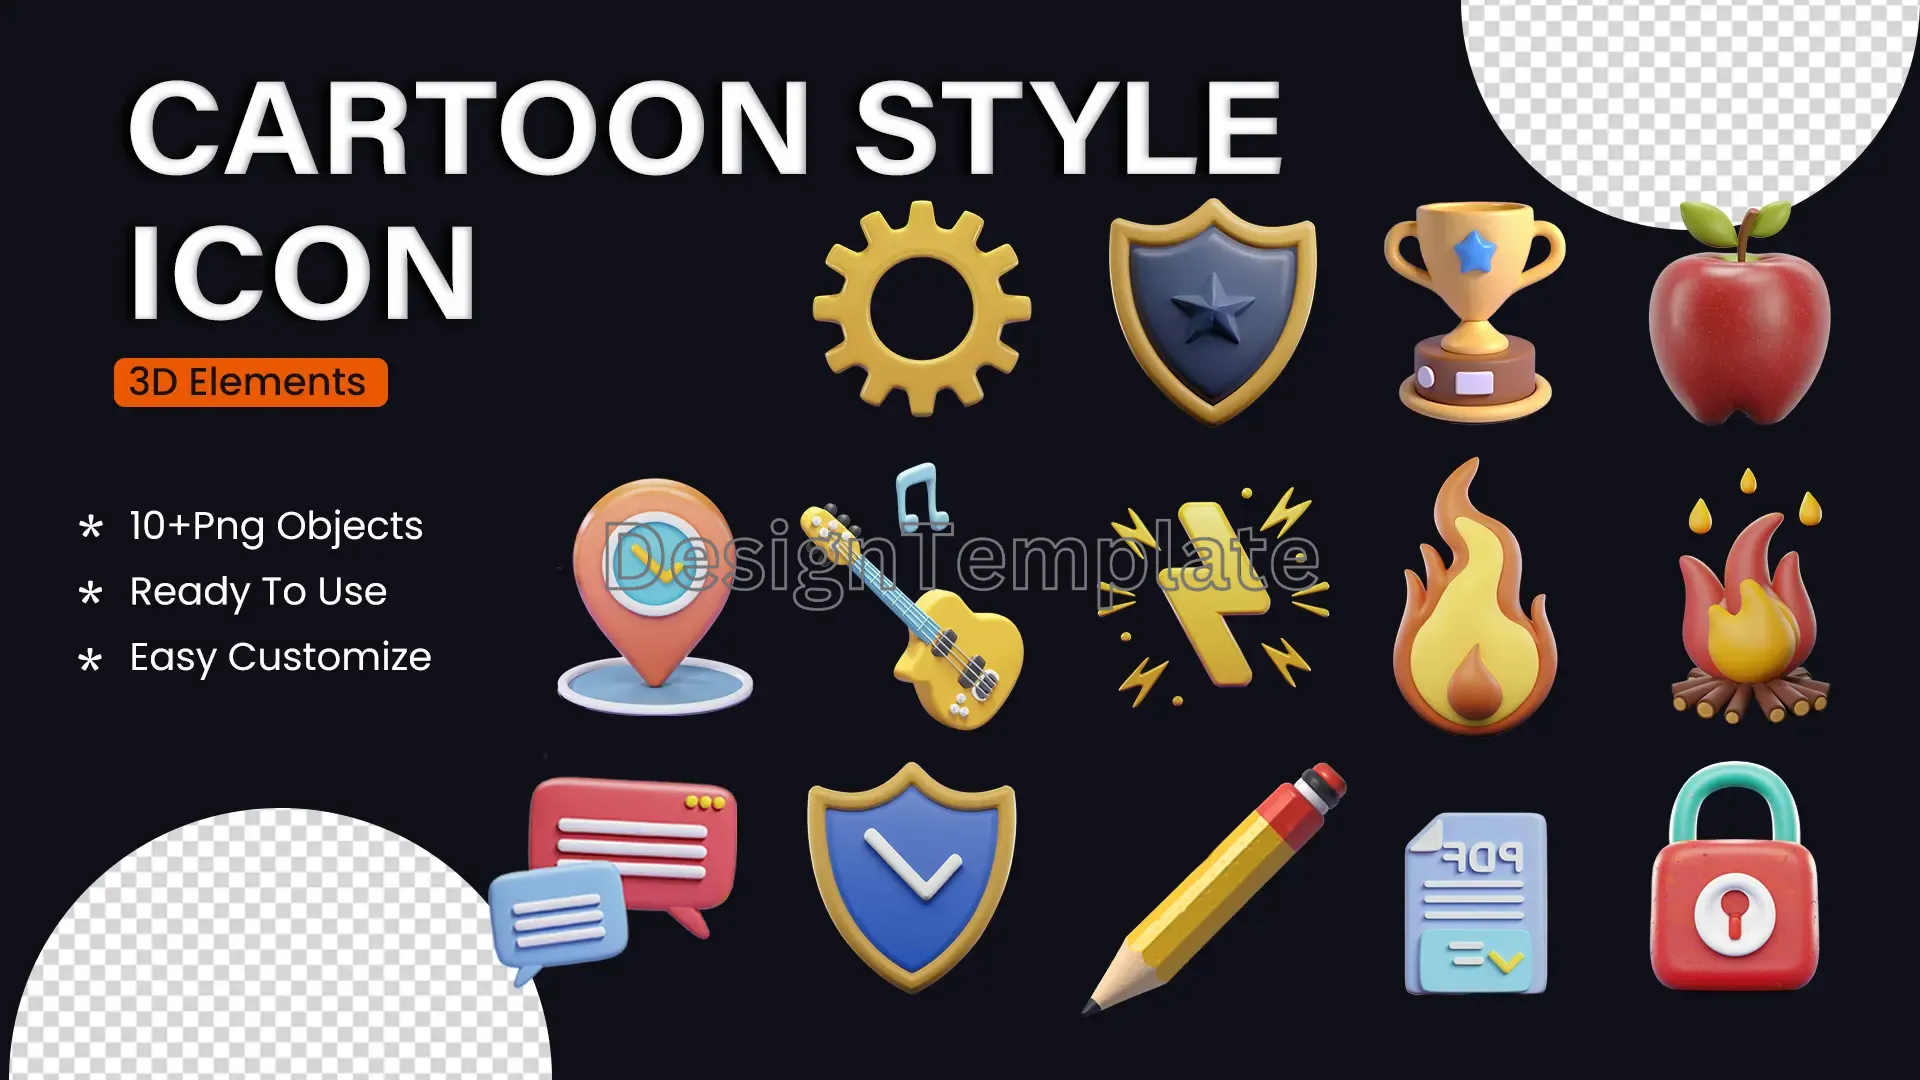 Cartoon Style Icon 3D Elements Pack